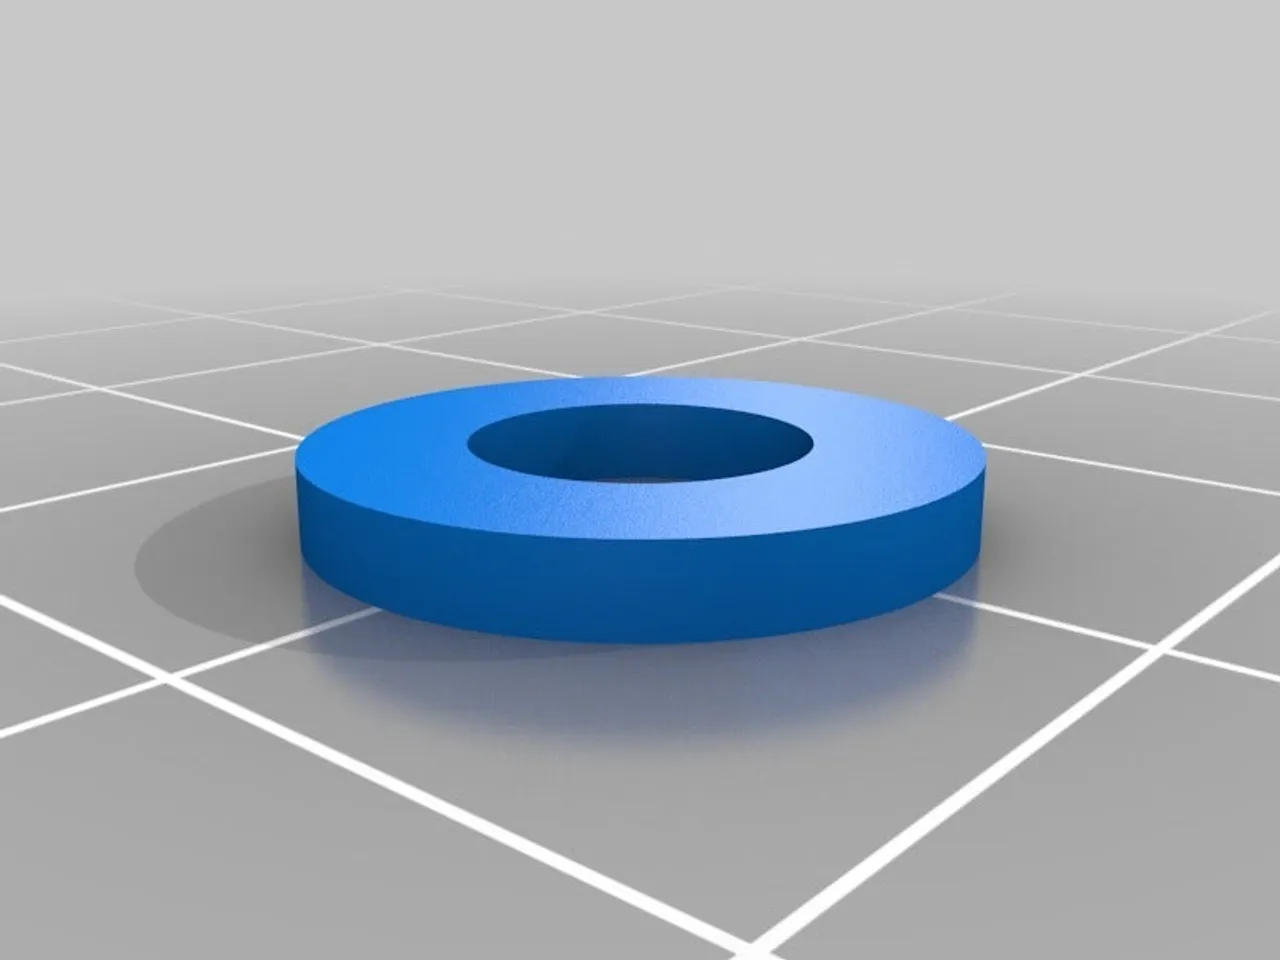 M6 Washer (1.6mm) by Inhibit, Download free STL model